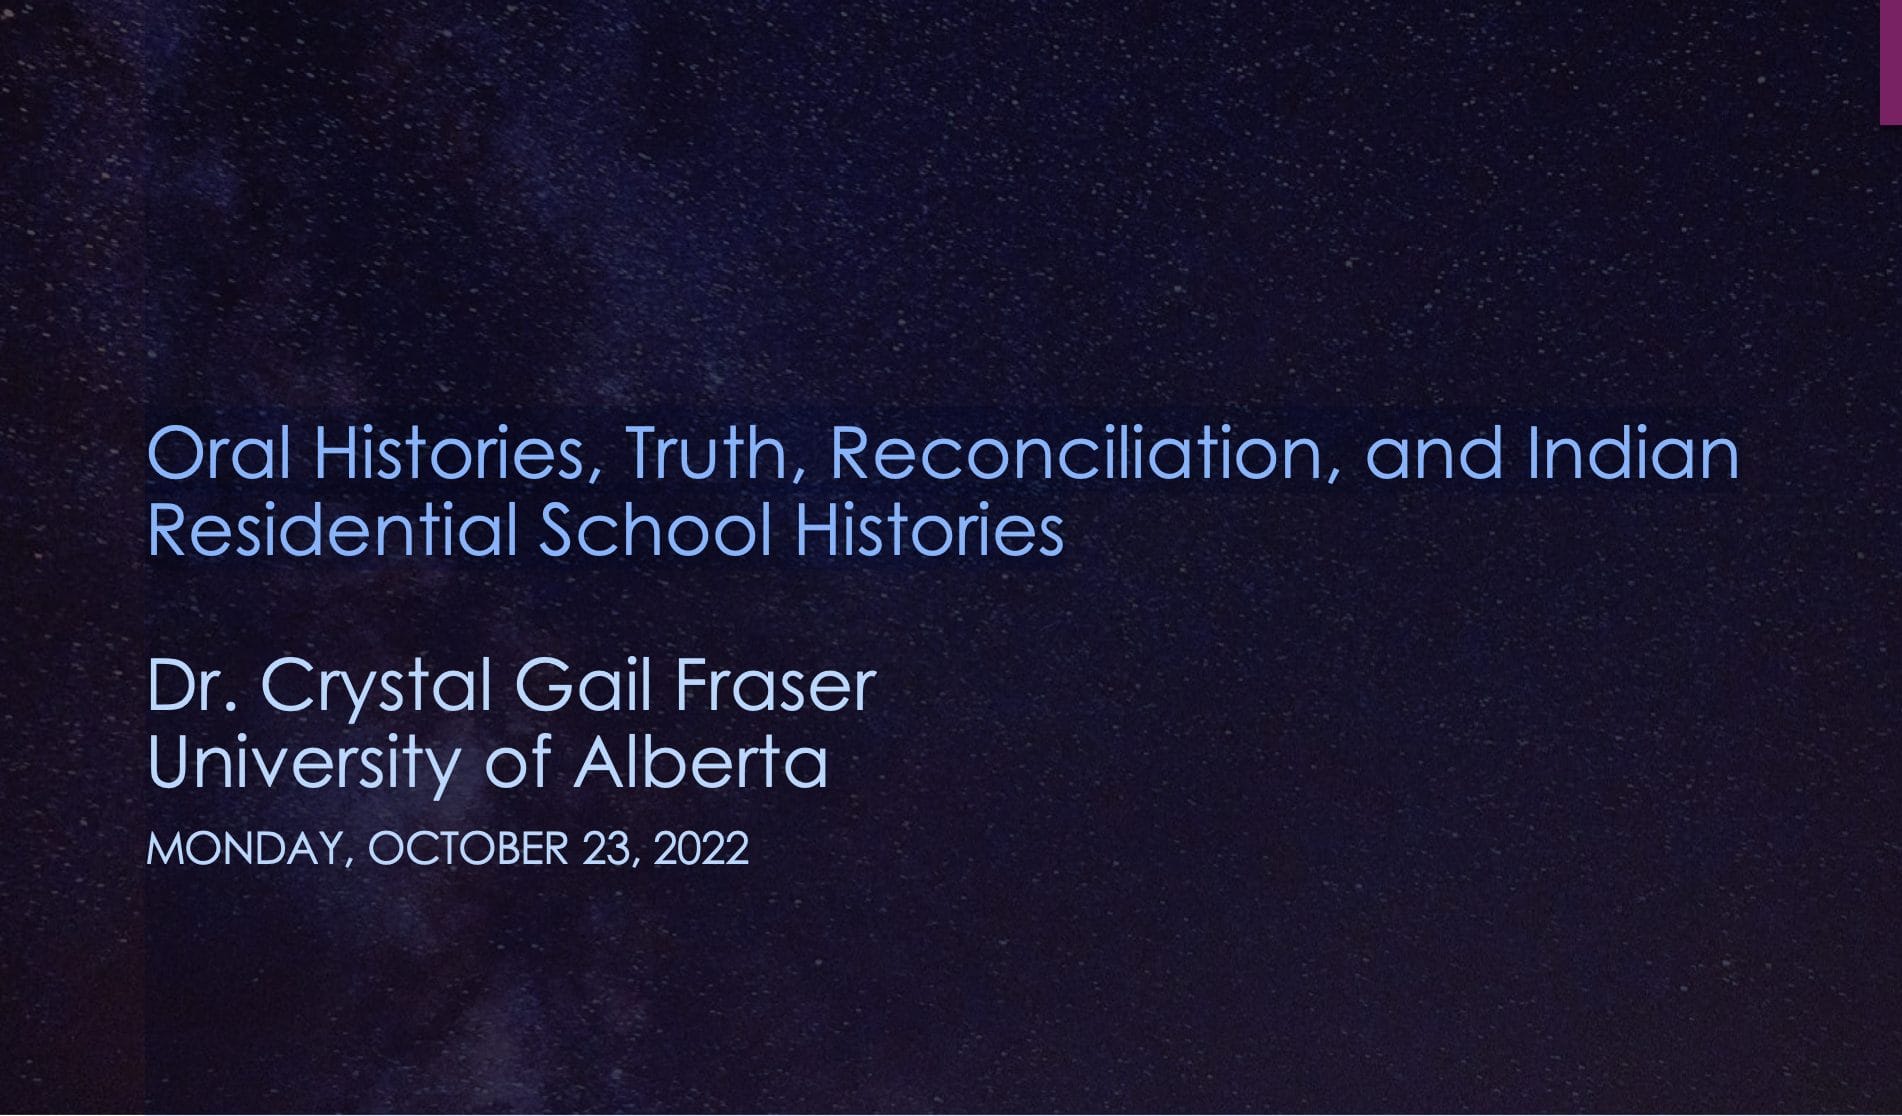  Oral Histories, Truth, Reconciliation, and Indian Residential School Histories